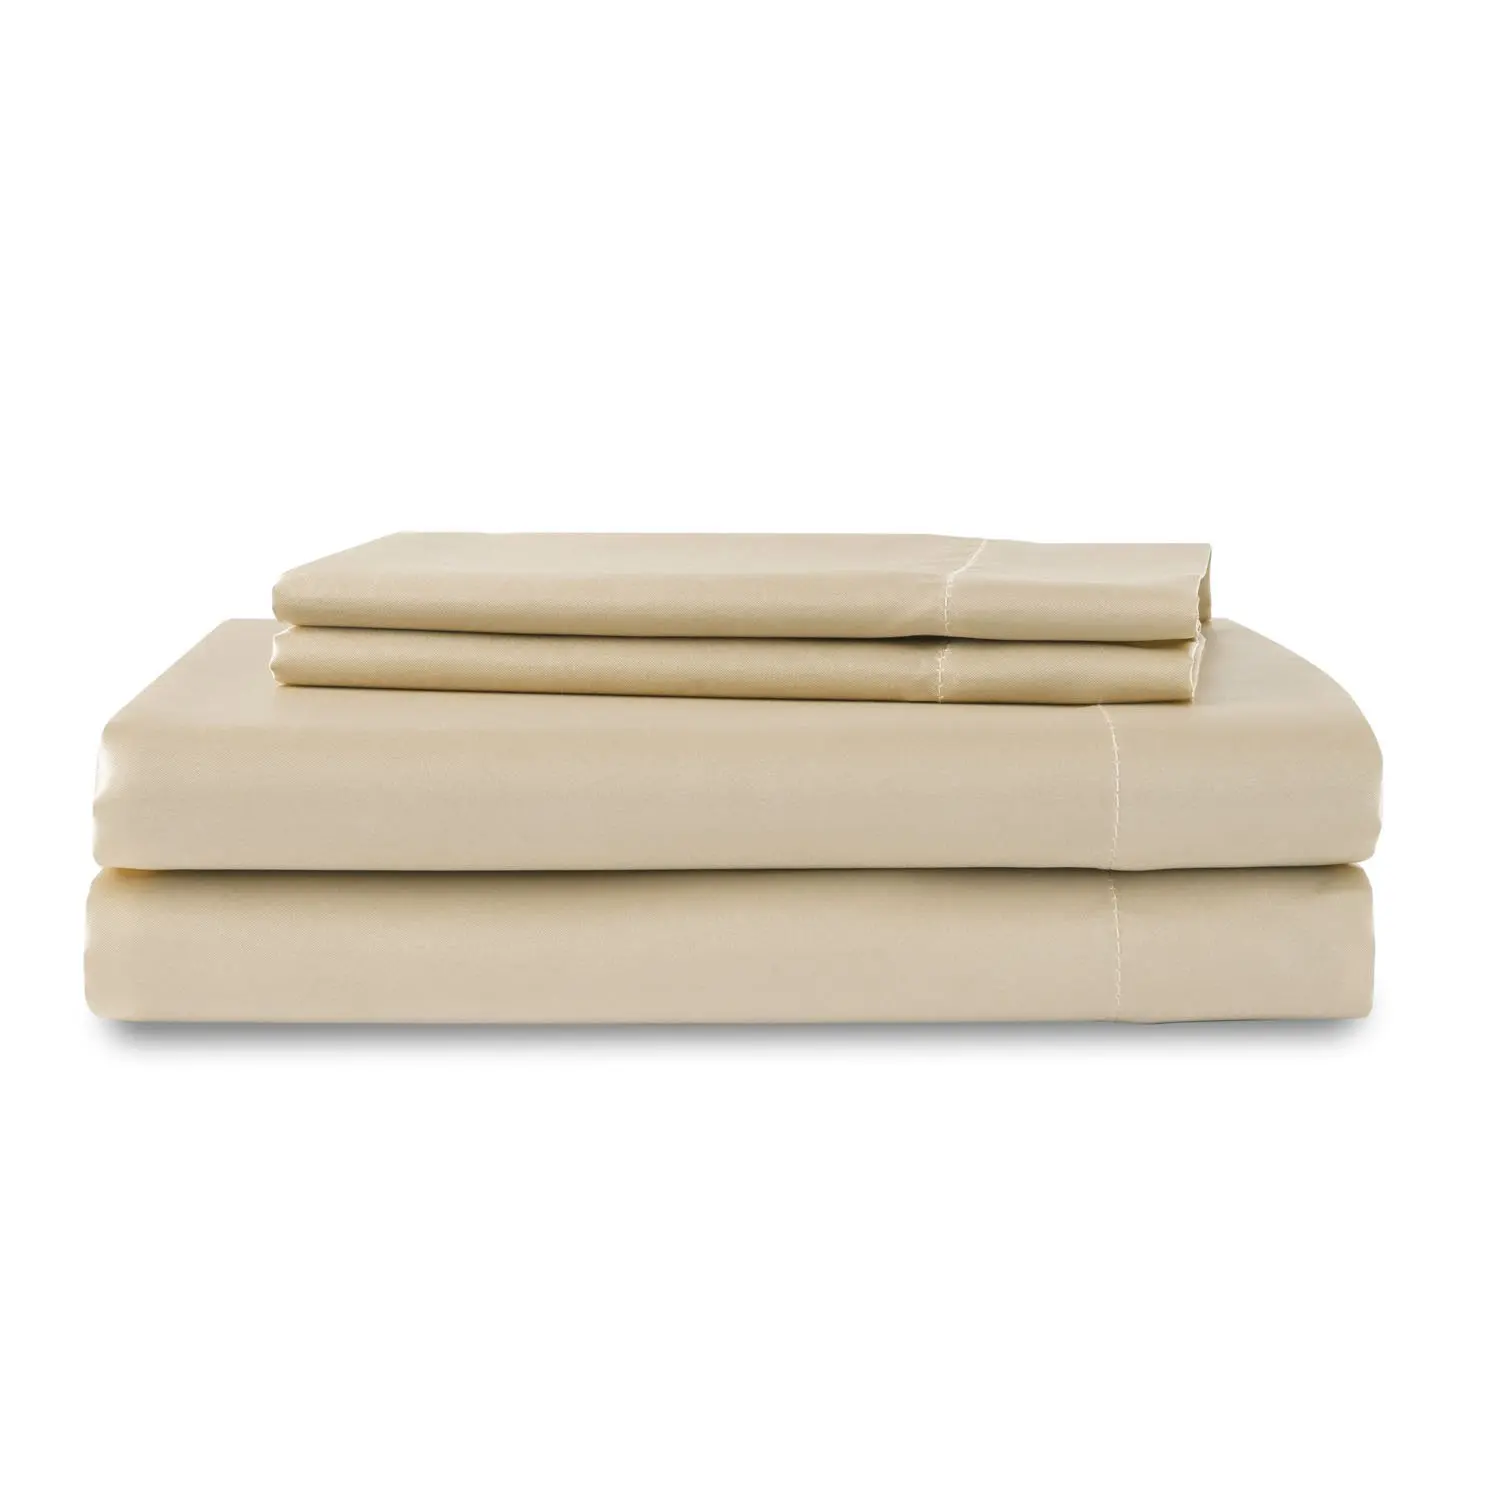 Cheap Tear Resistant Bed Sheets Find Tear Resistant Bed Sheets Deals 